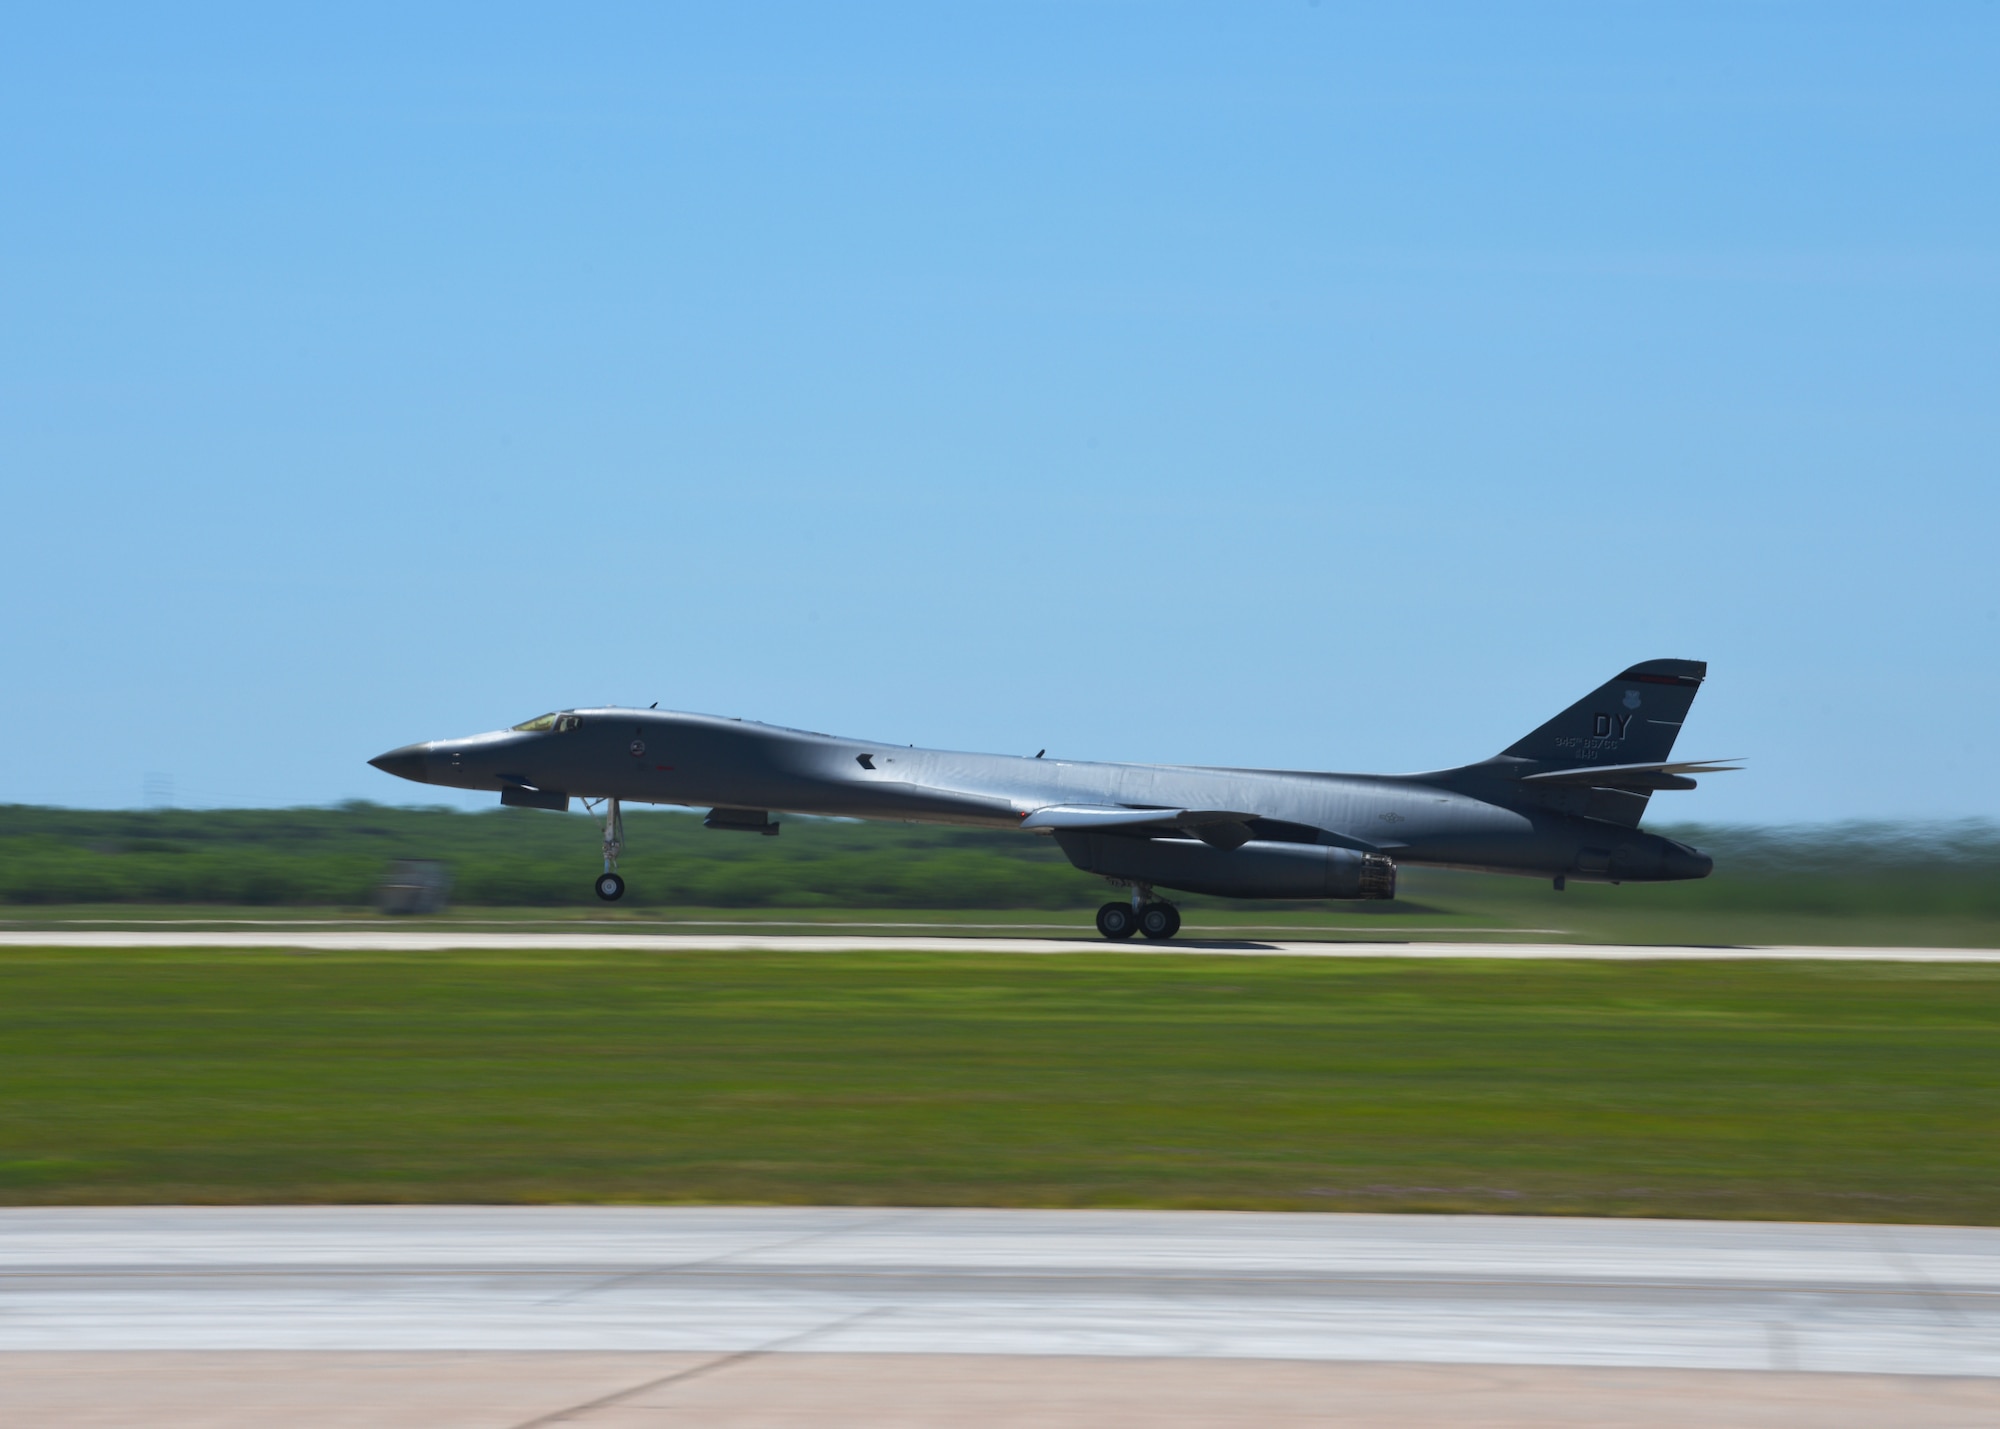 A B-1B from the 9th Bomb Squadron Lancer takes off for a Bomber Task Force deployment at Dyess Air Force Base, Texas, April 30, 2020. Four B-1Bs deployed to Andersen Air Force Base, Guam, As part of U.S. Strategic Command’s support to the National Defense Strategy objectives of strategic predictability and operational unpredictability by using a mix of different aircraft to and from various dispersed U.S. bases and other departure and arrival points, to include Guam. (U.S. Air Force photo by Senior Airman Mercedes Porter)